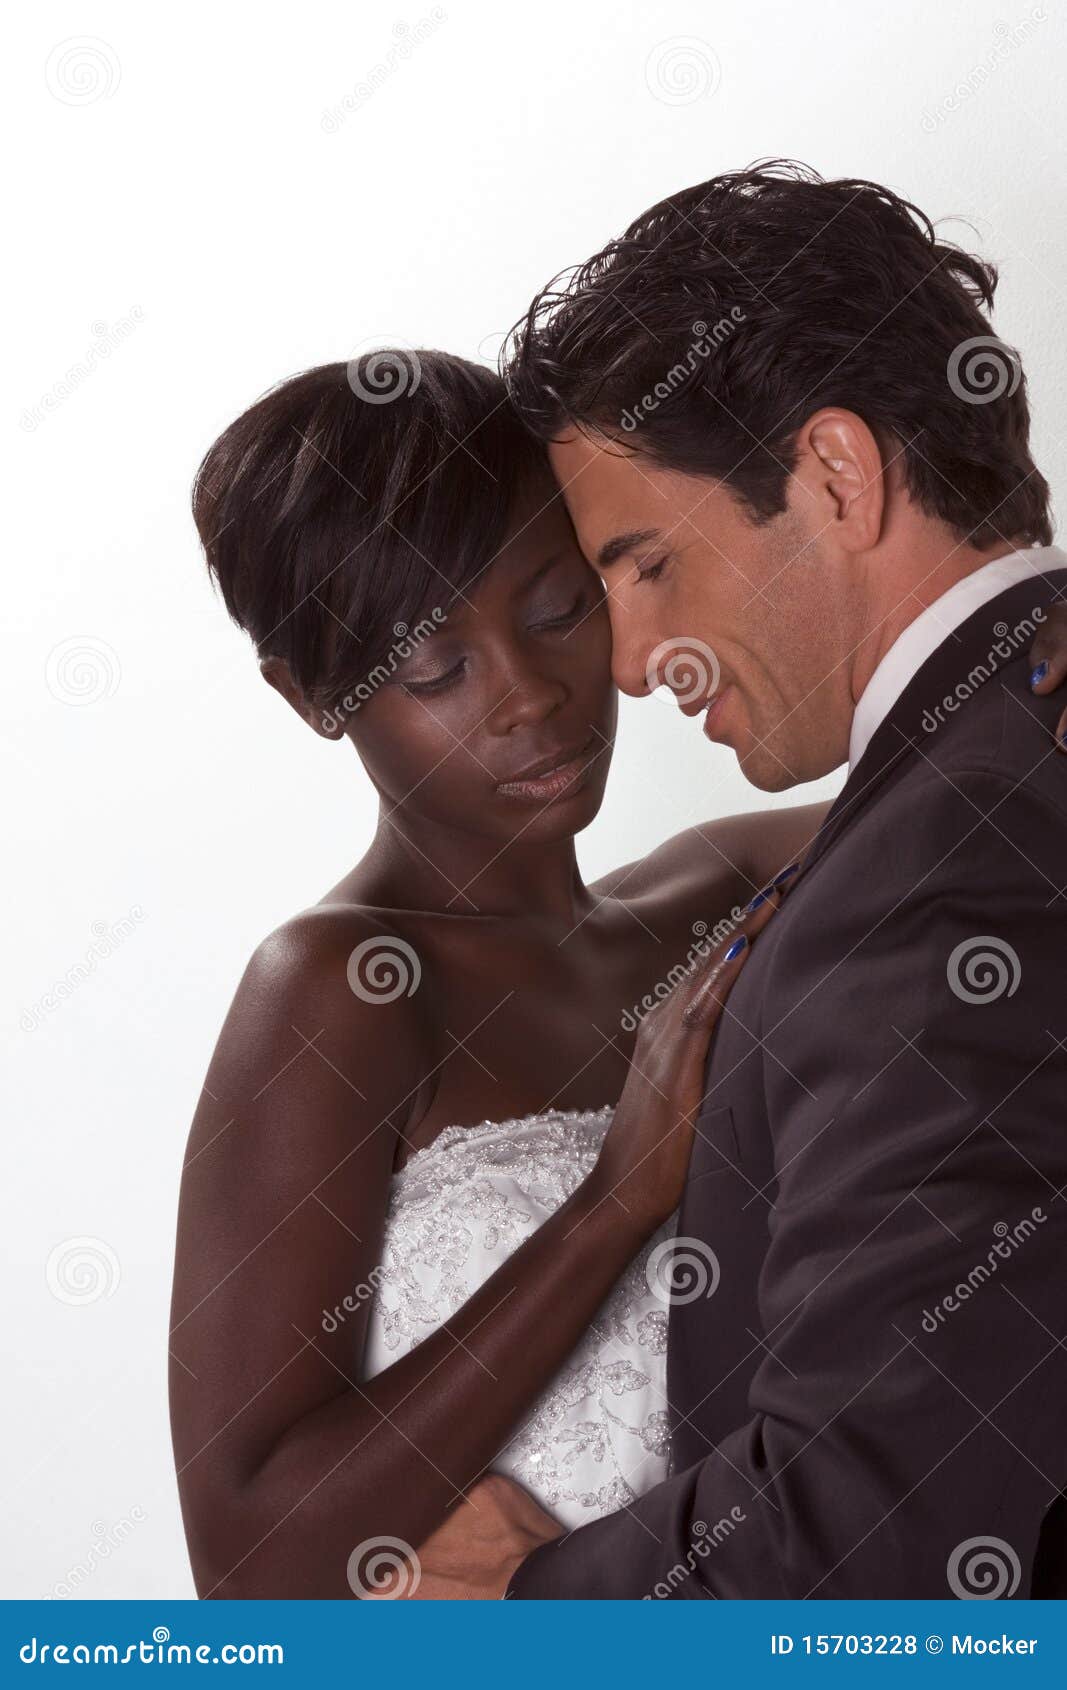 Happy New Wed Interracial Couple in Wedding Mood Stock Photo picture pic